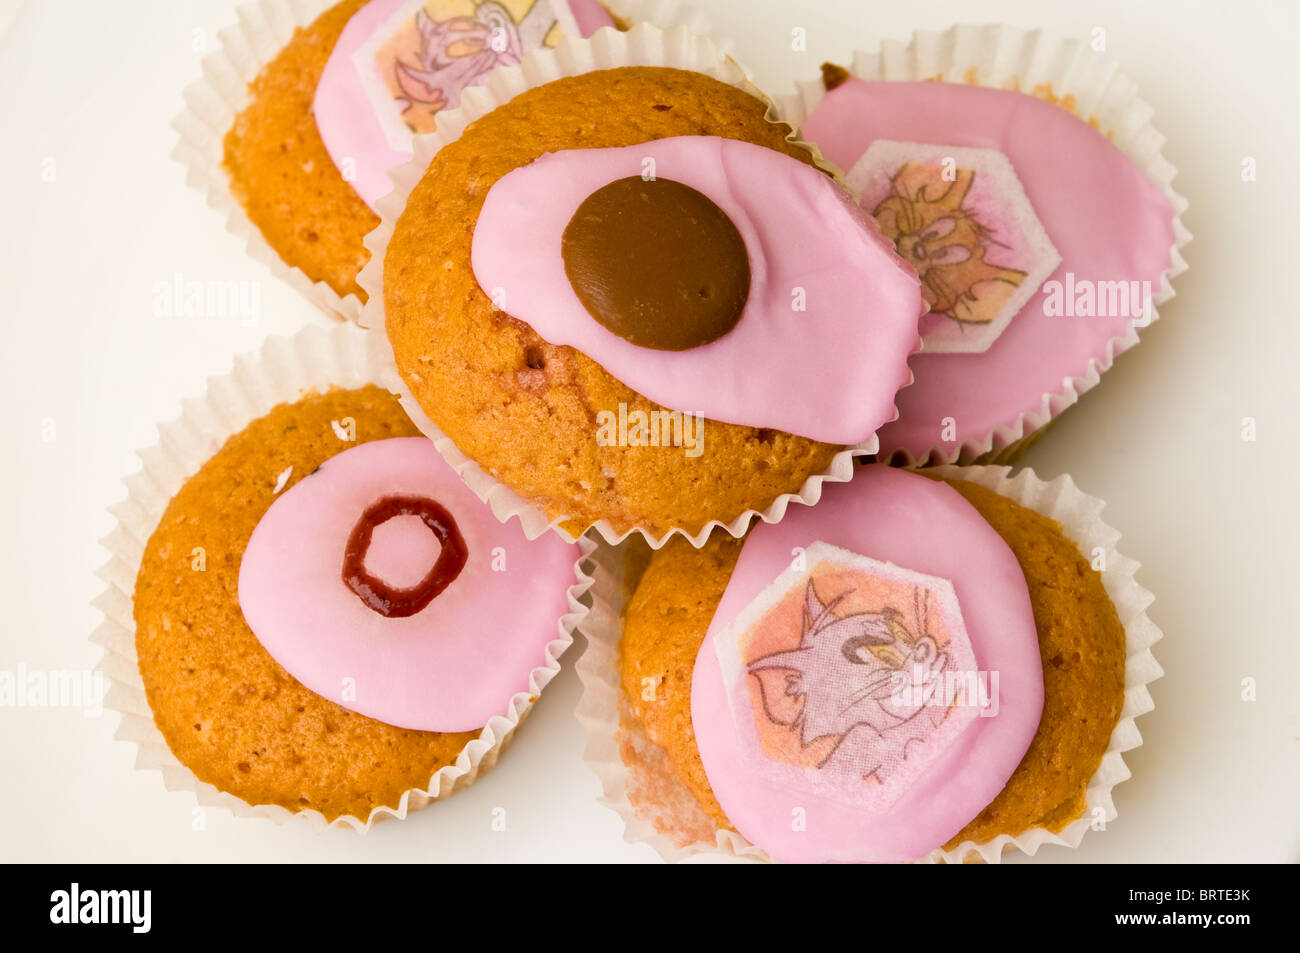 Home Made Fairy Cakes On A White Plate Stock Photo